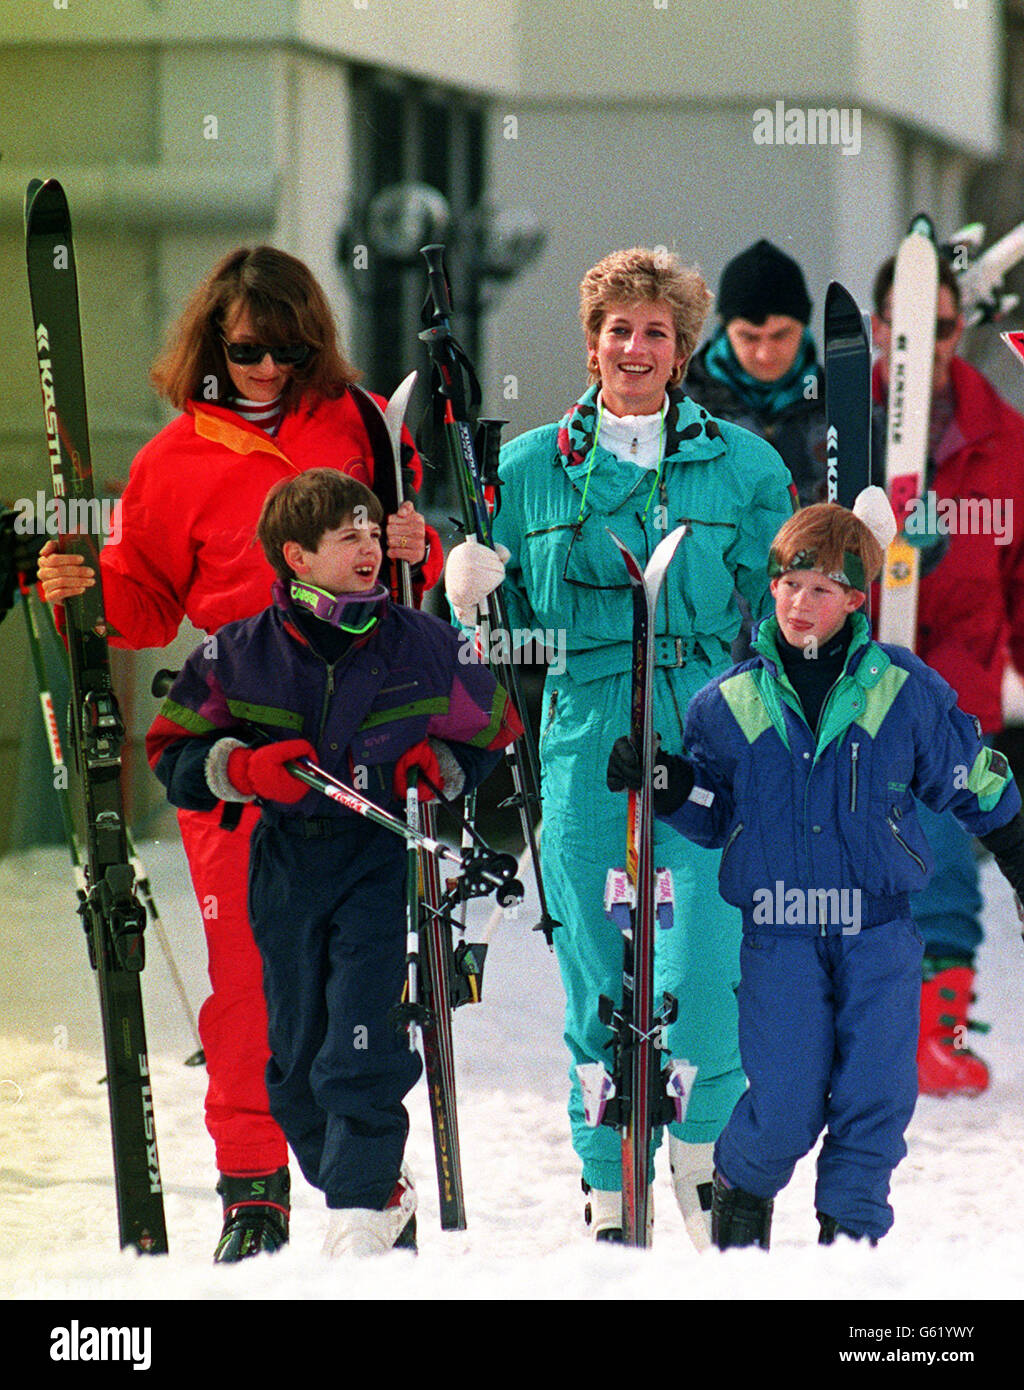 Diana And Harry Stock Photos & Diana And Harry Stock Images - Alamy